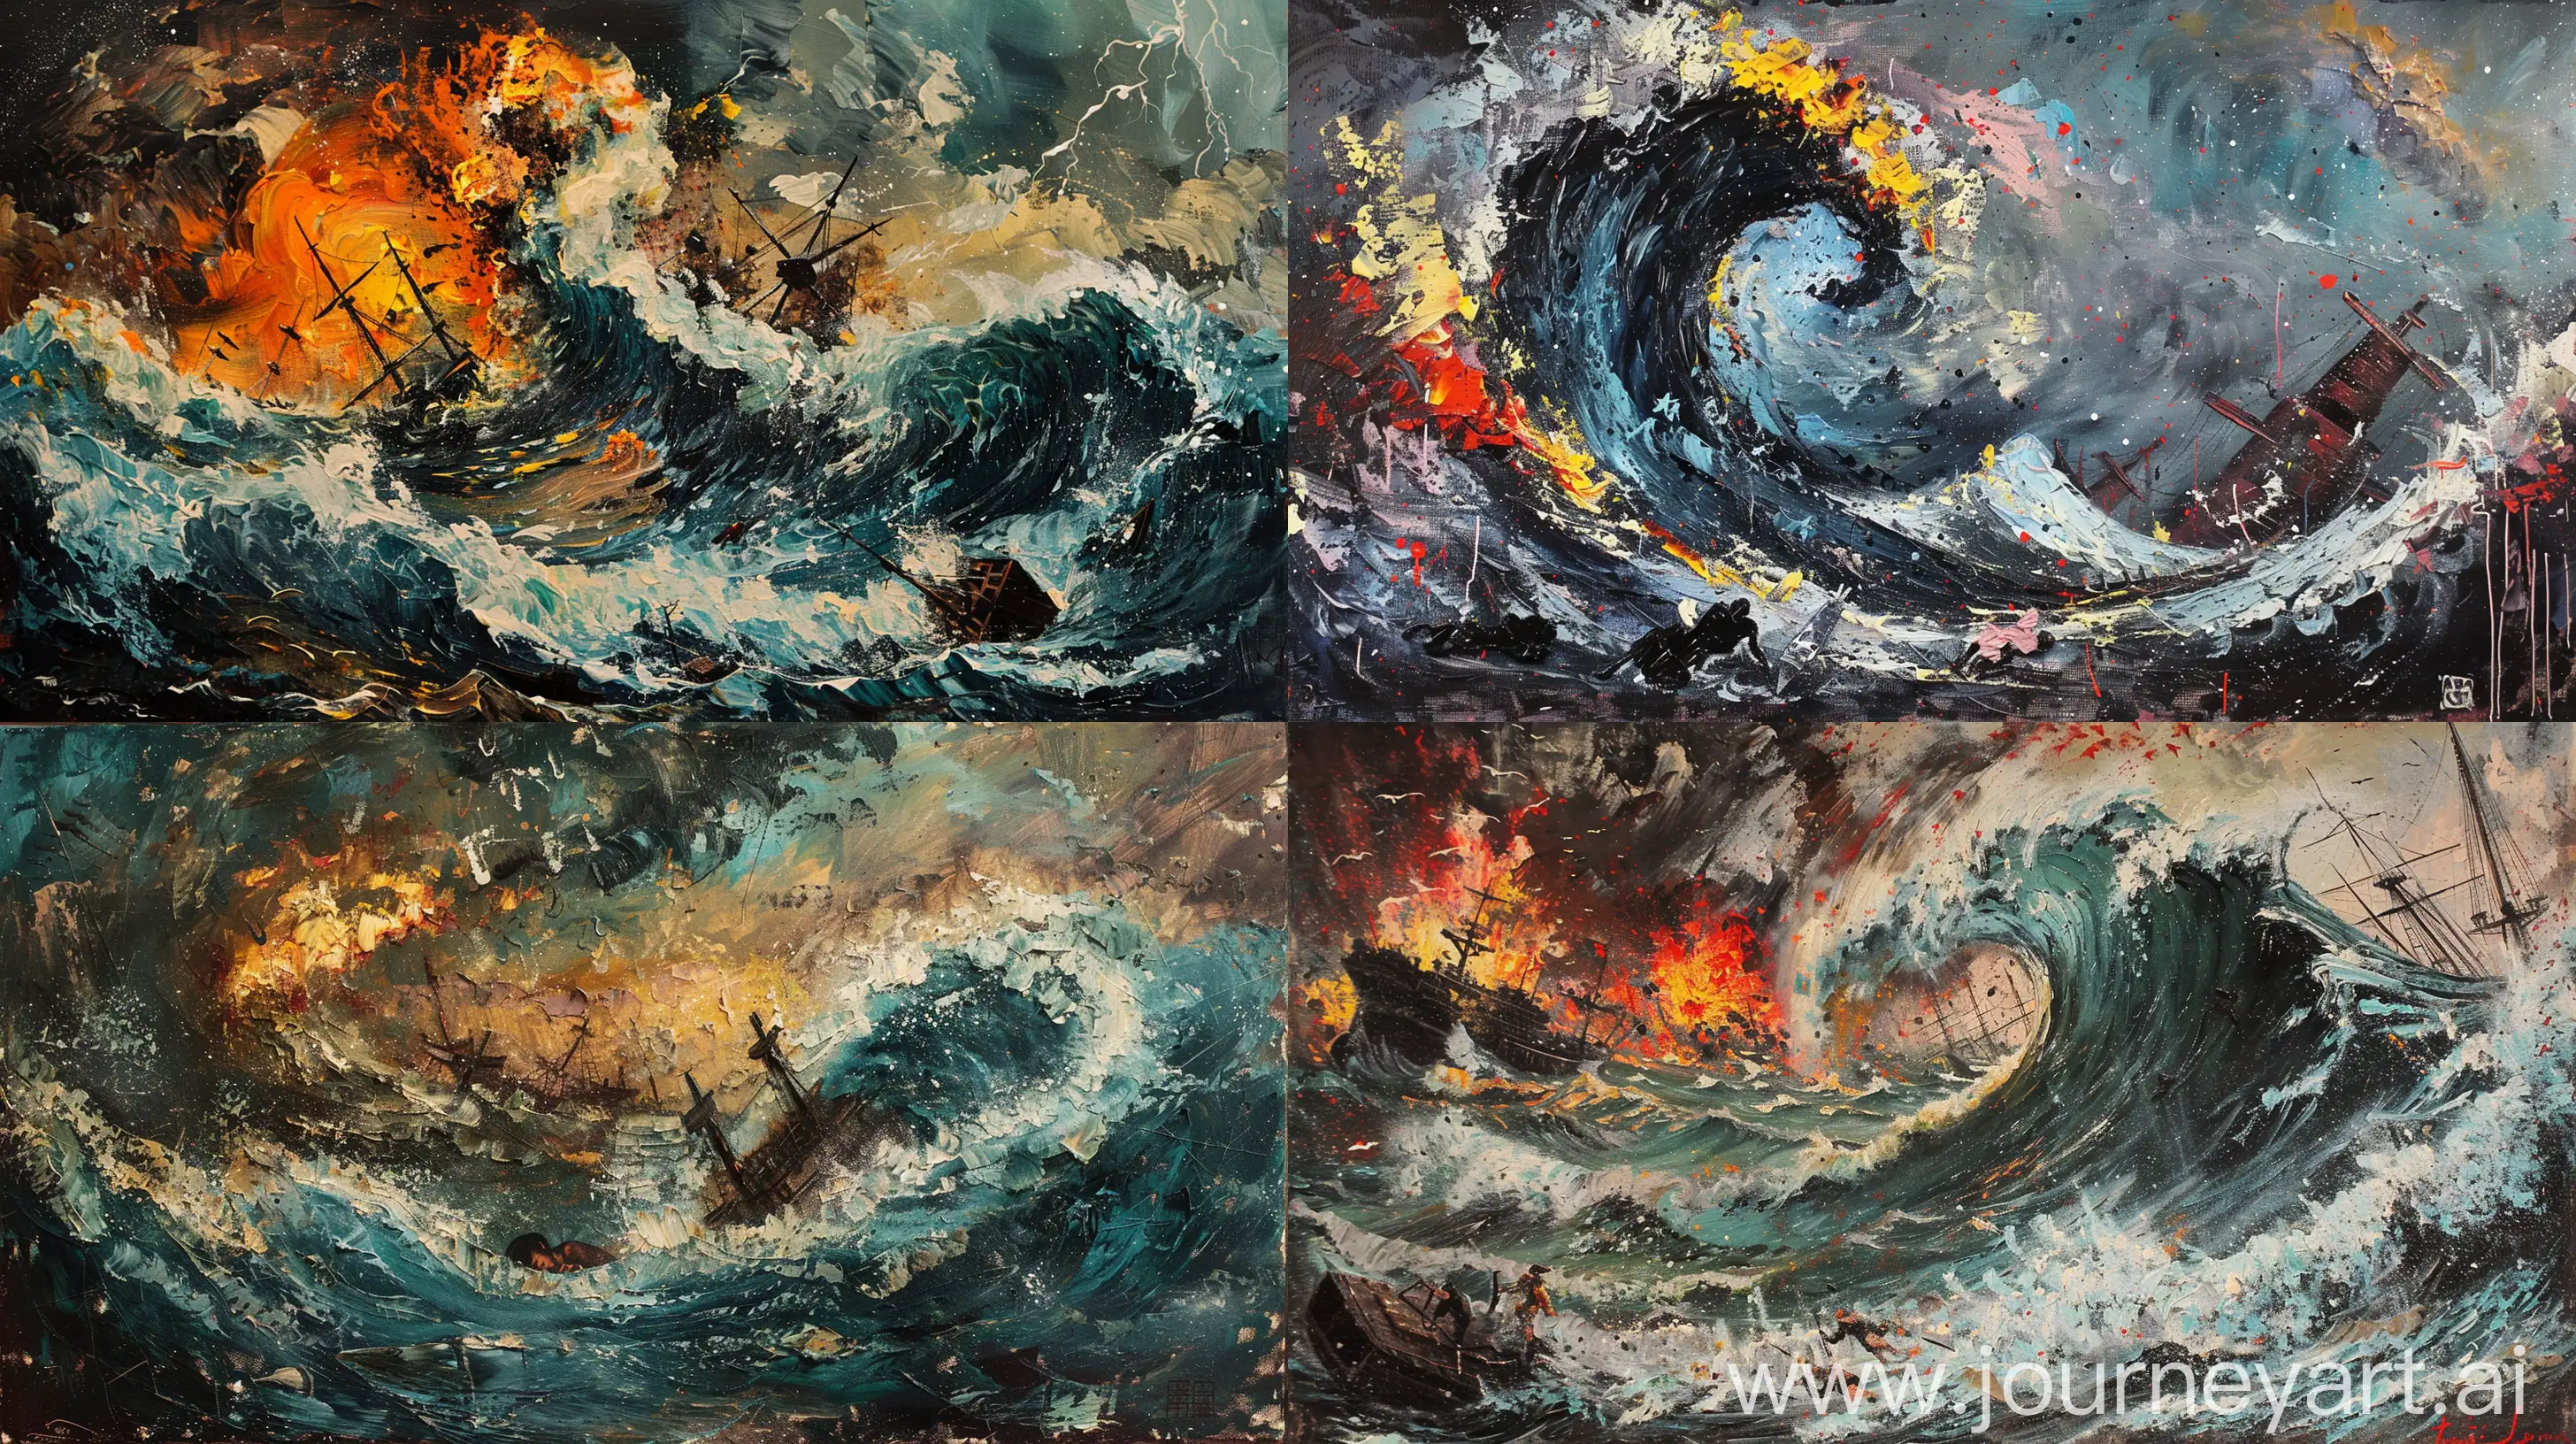 Impasto-Palette-Knife-Painting-Chinese-War-Ships-Battling-Tornado-and-Fire-in-Dramatic-Vintage-Scene